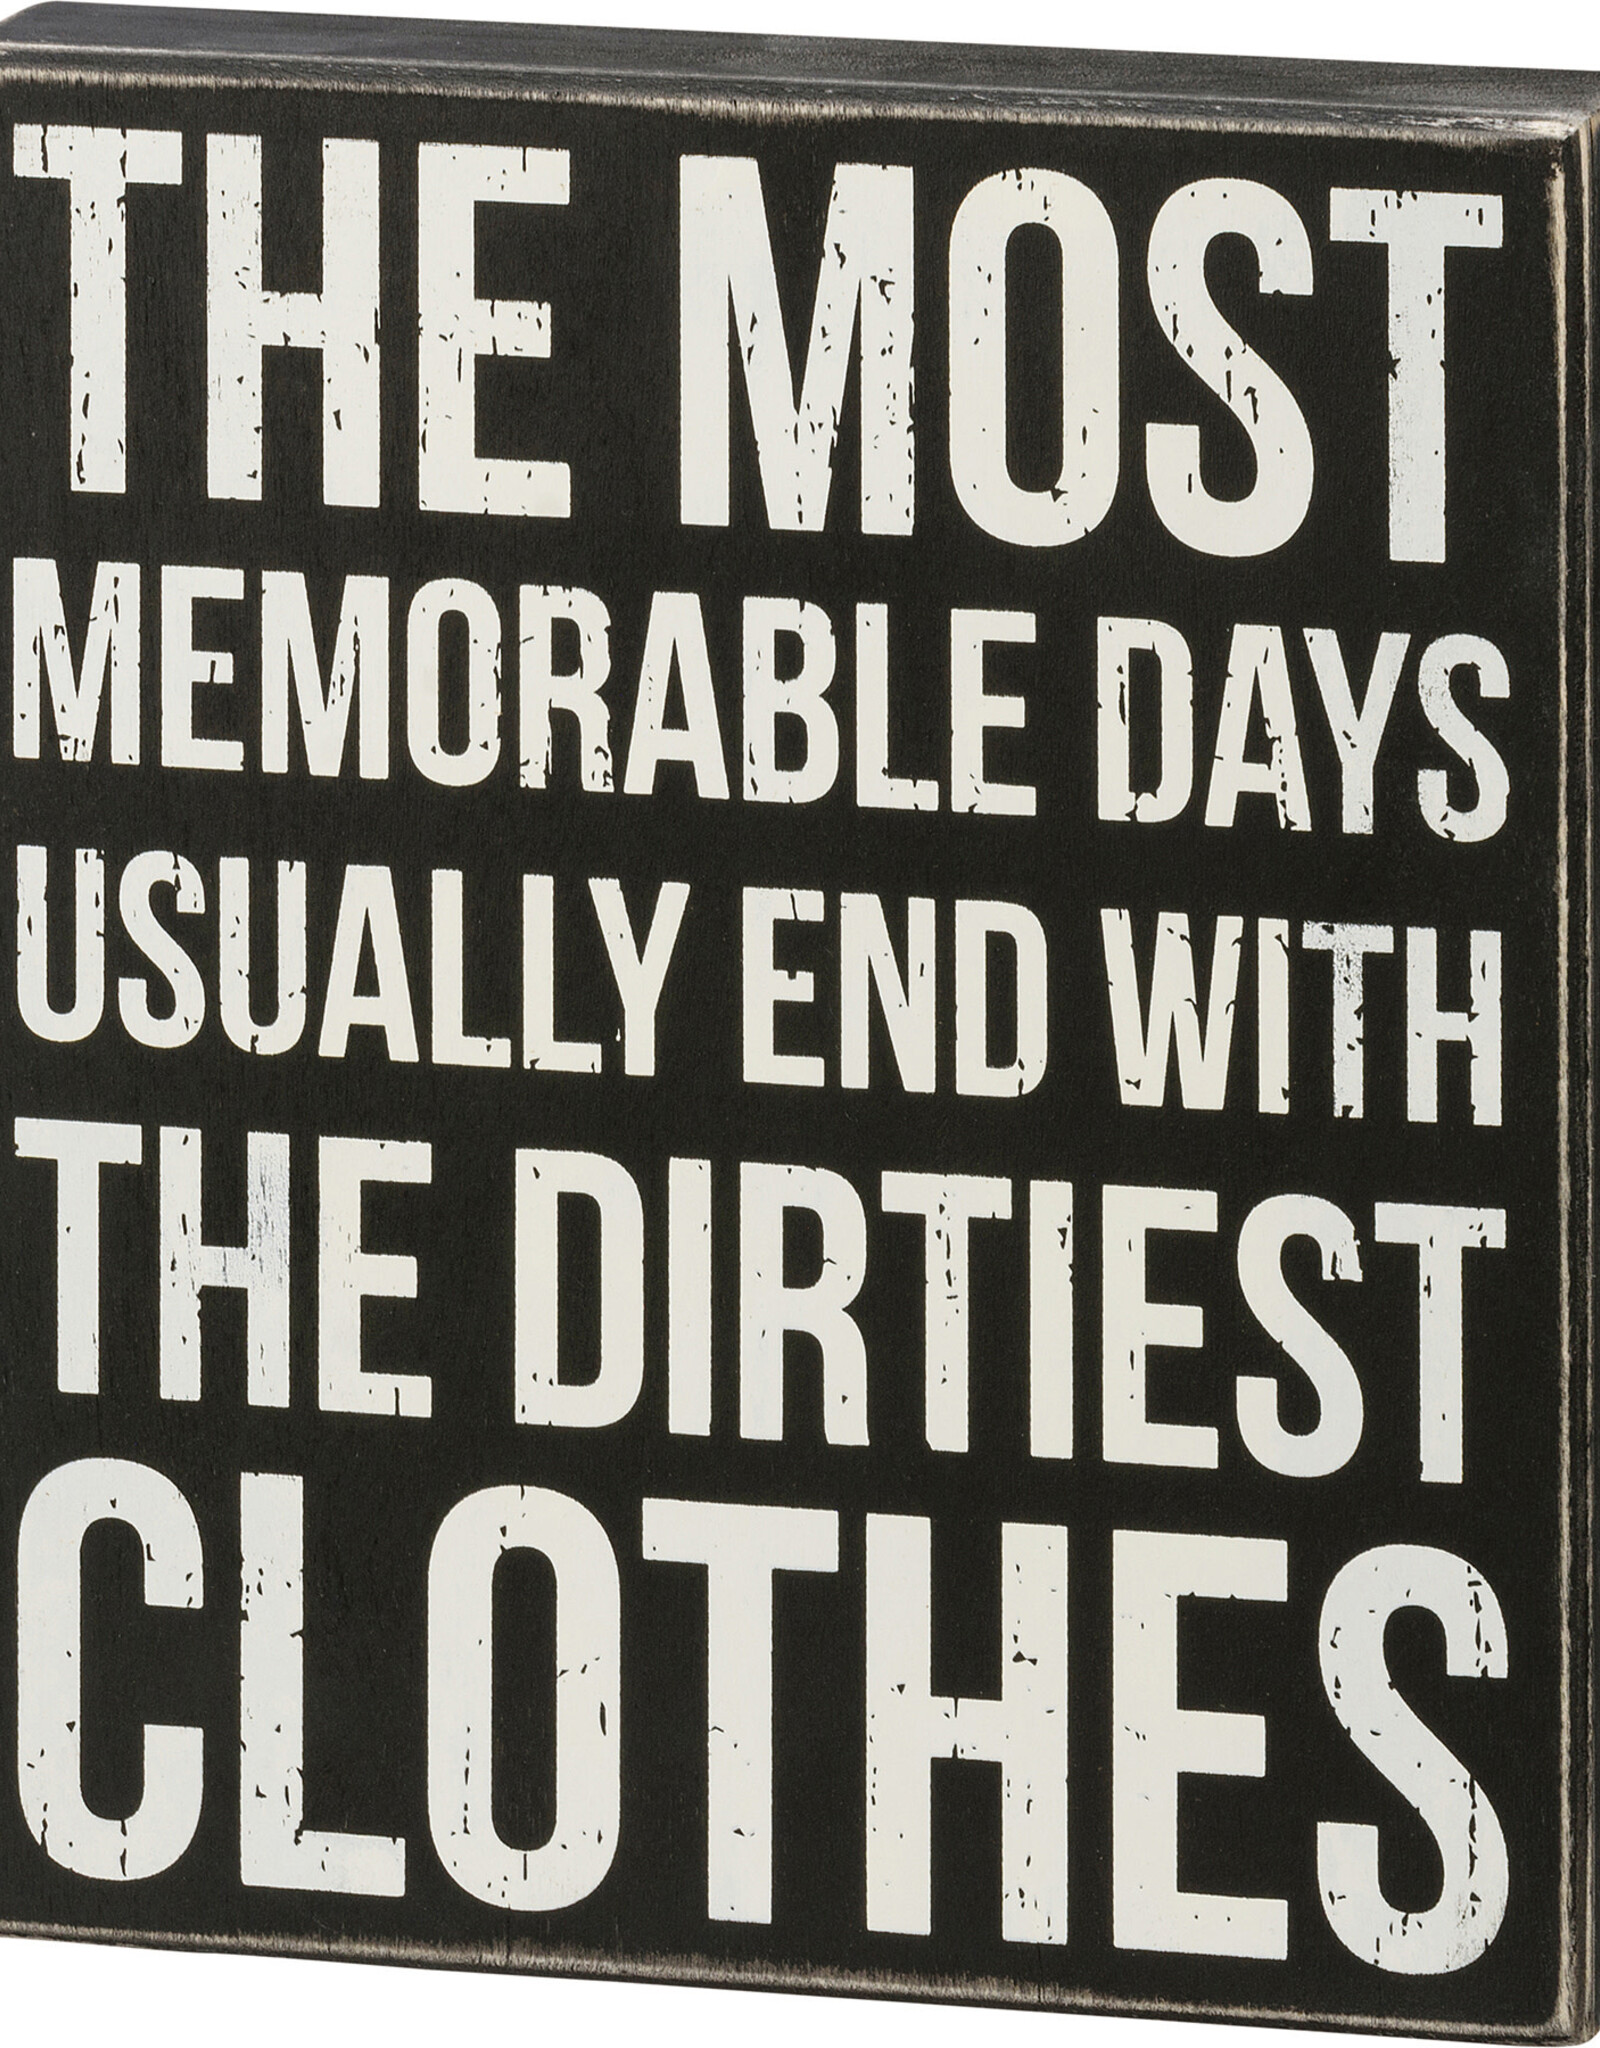 Memorable Days With Dirtiest Clothes Box Sign